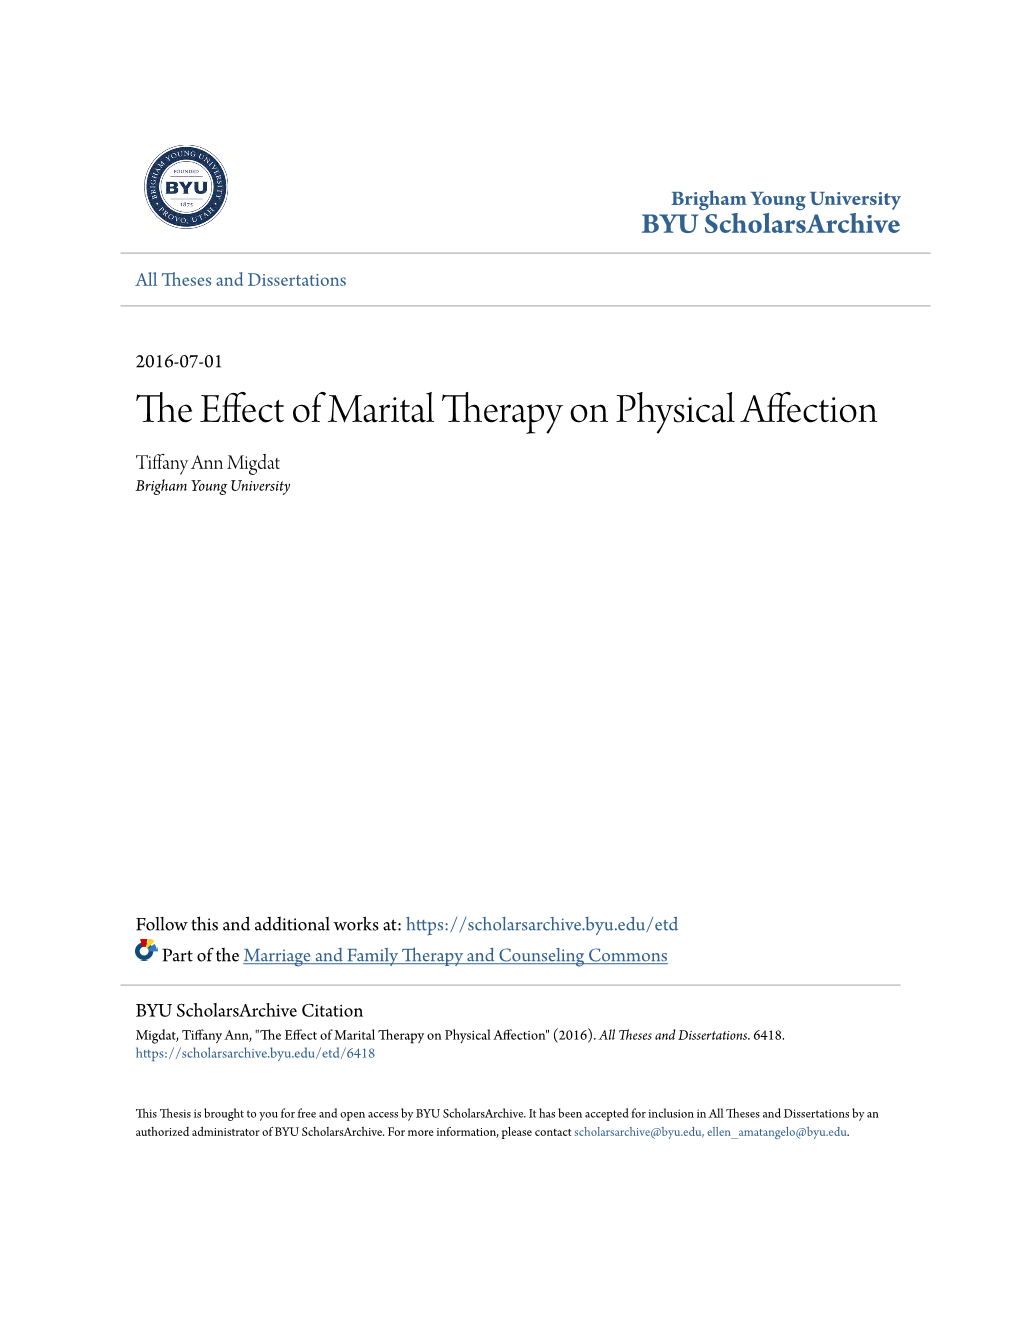 The Effect of Marital Therapy on Physical Affection" (2016)